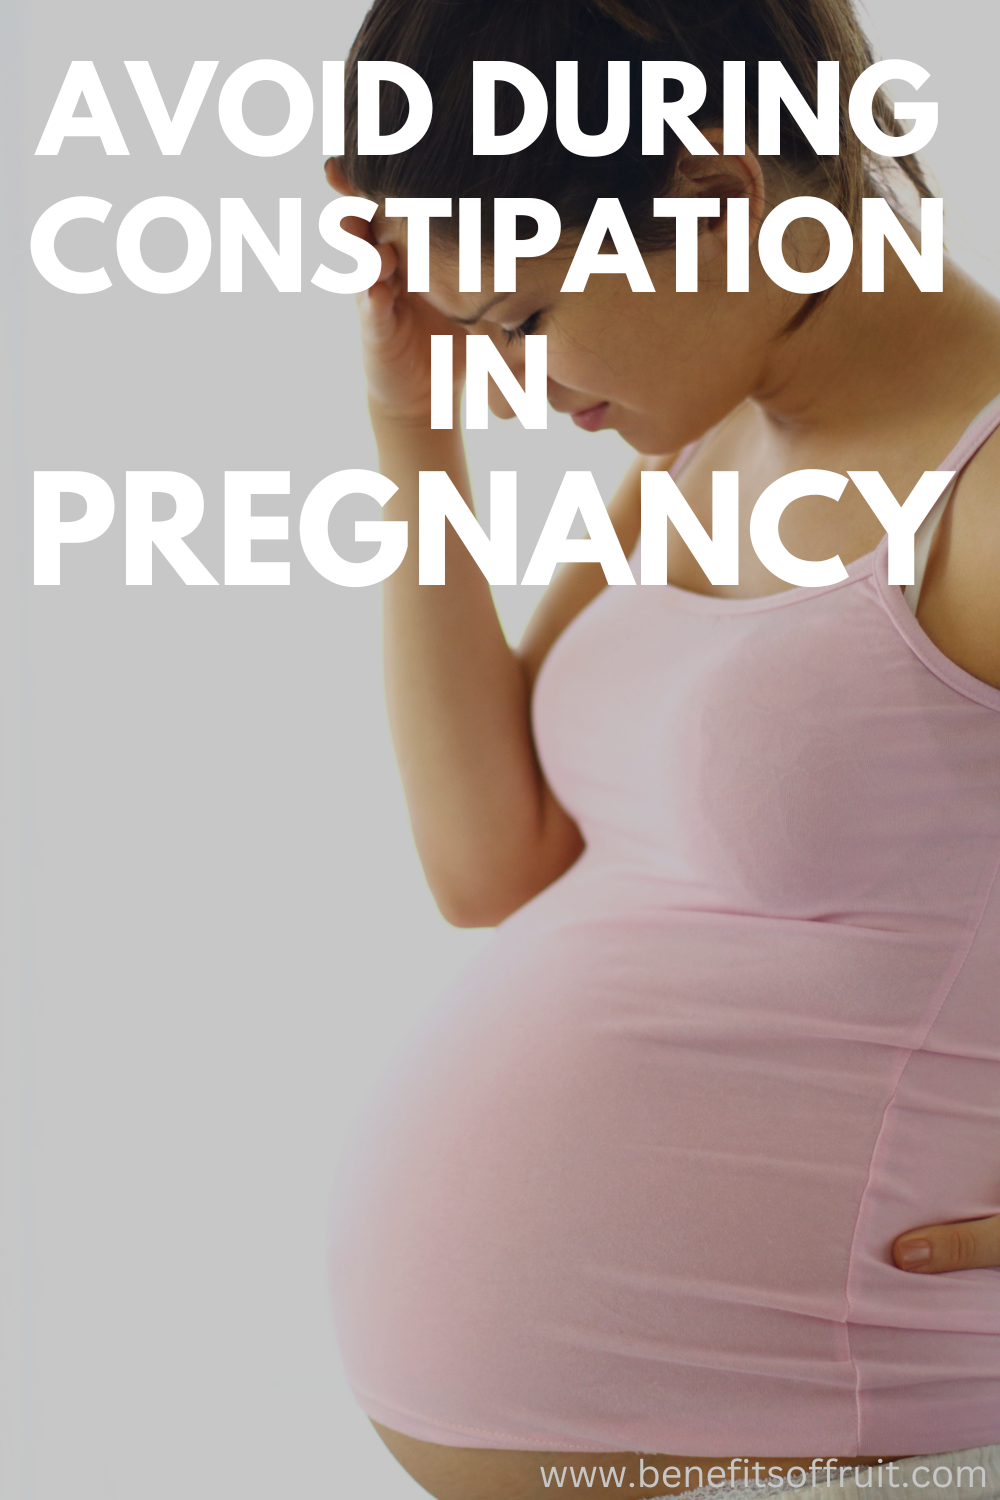 Fruits To Avoid During Constipation During Pregnancy